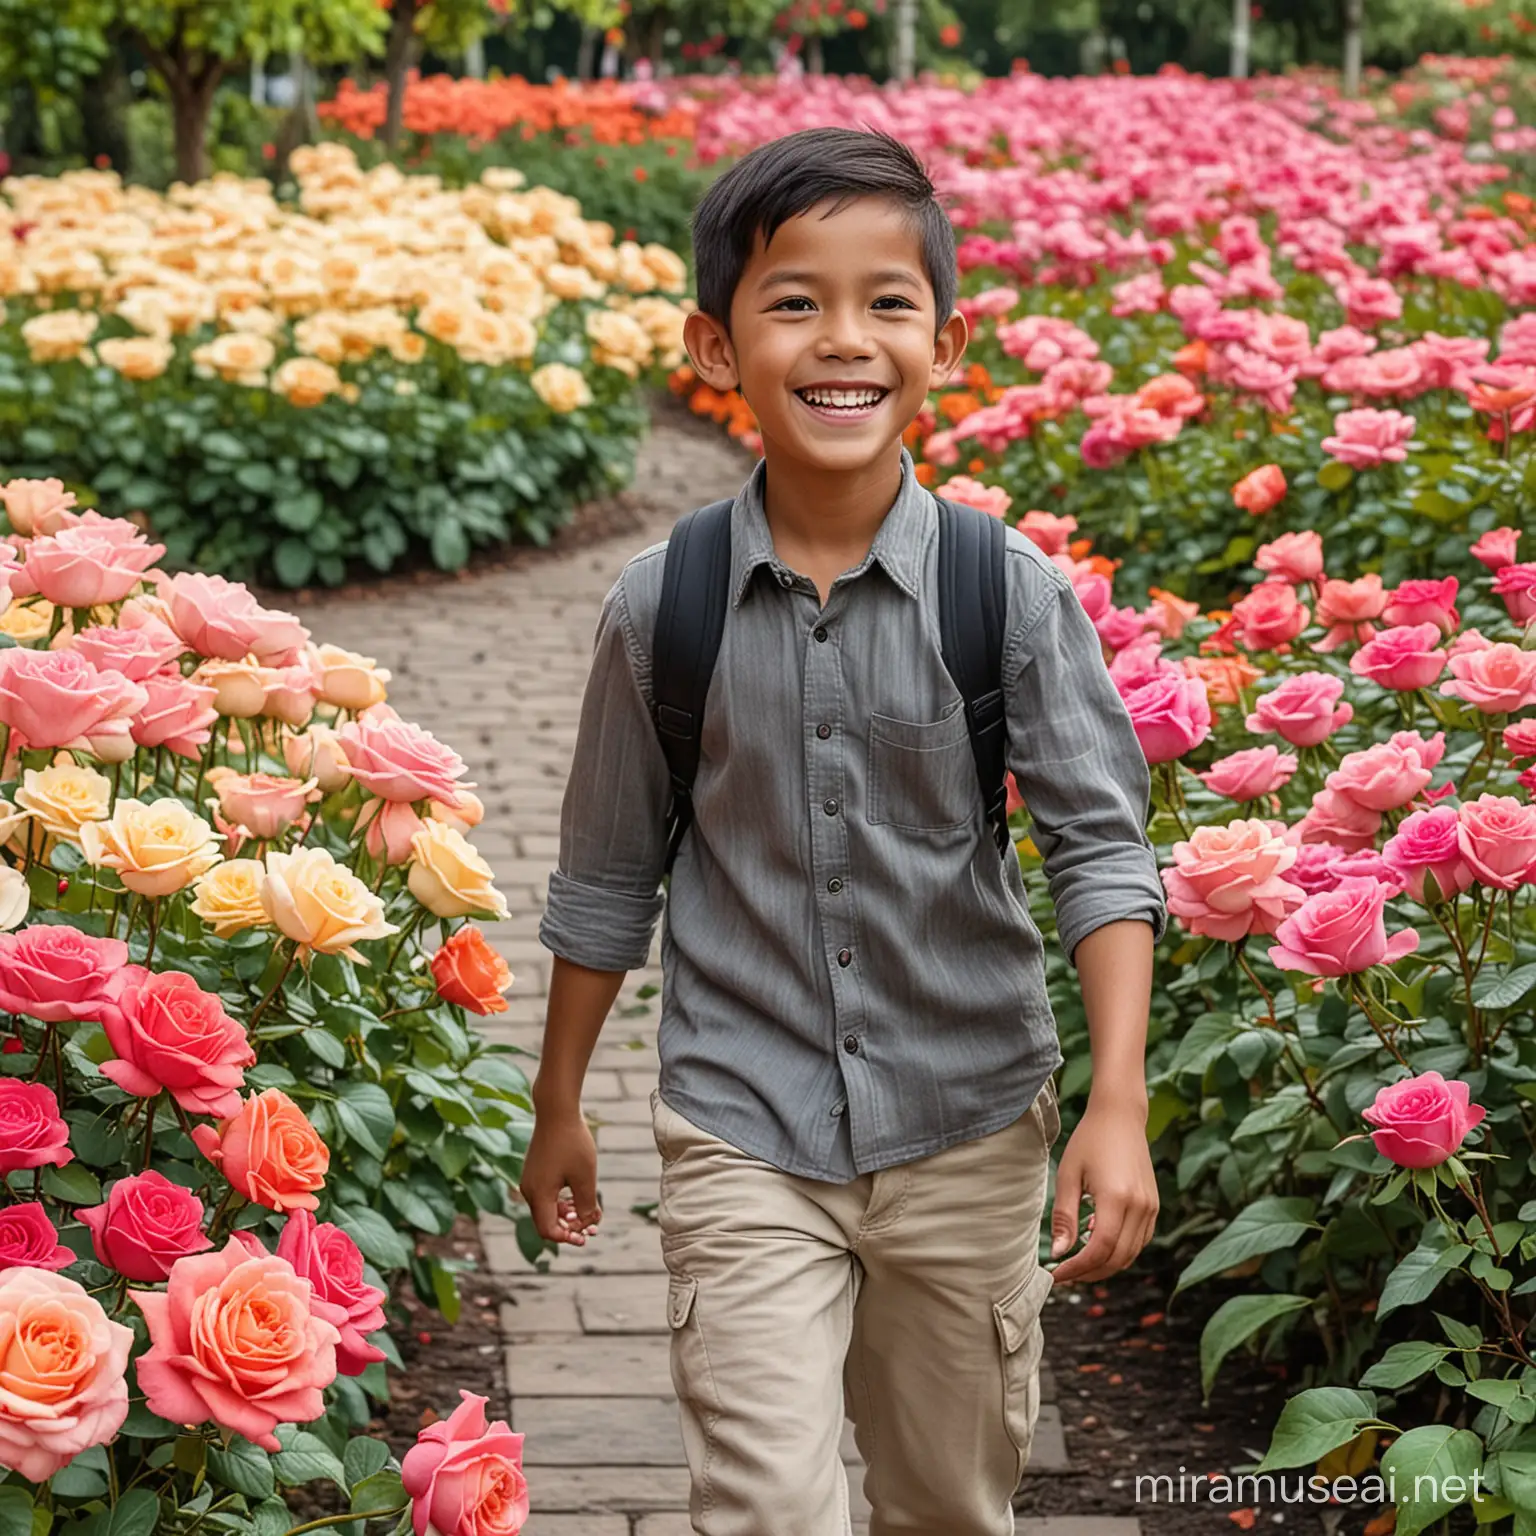 Joyful Indonesian Boy Carrying Baby Brother in Colorful Rose Garden